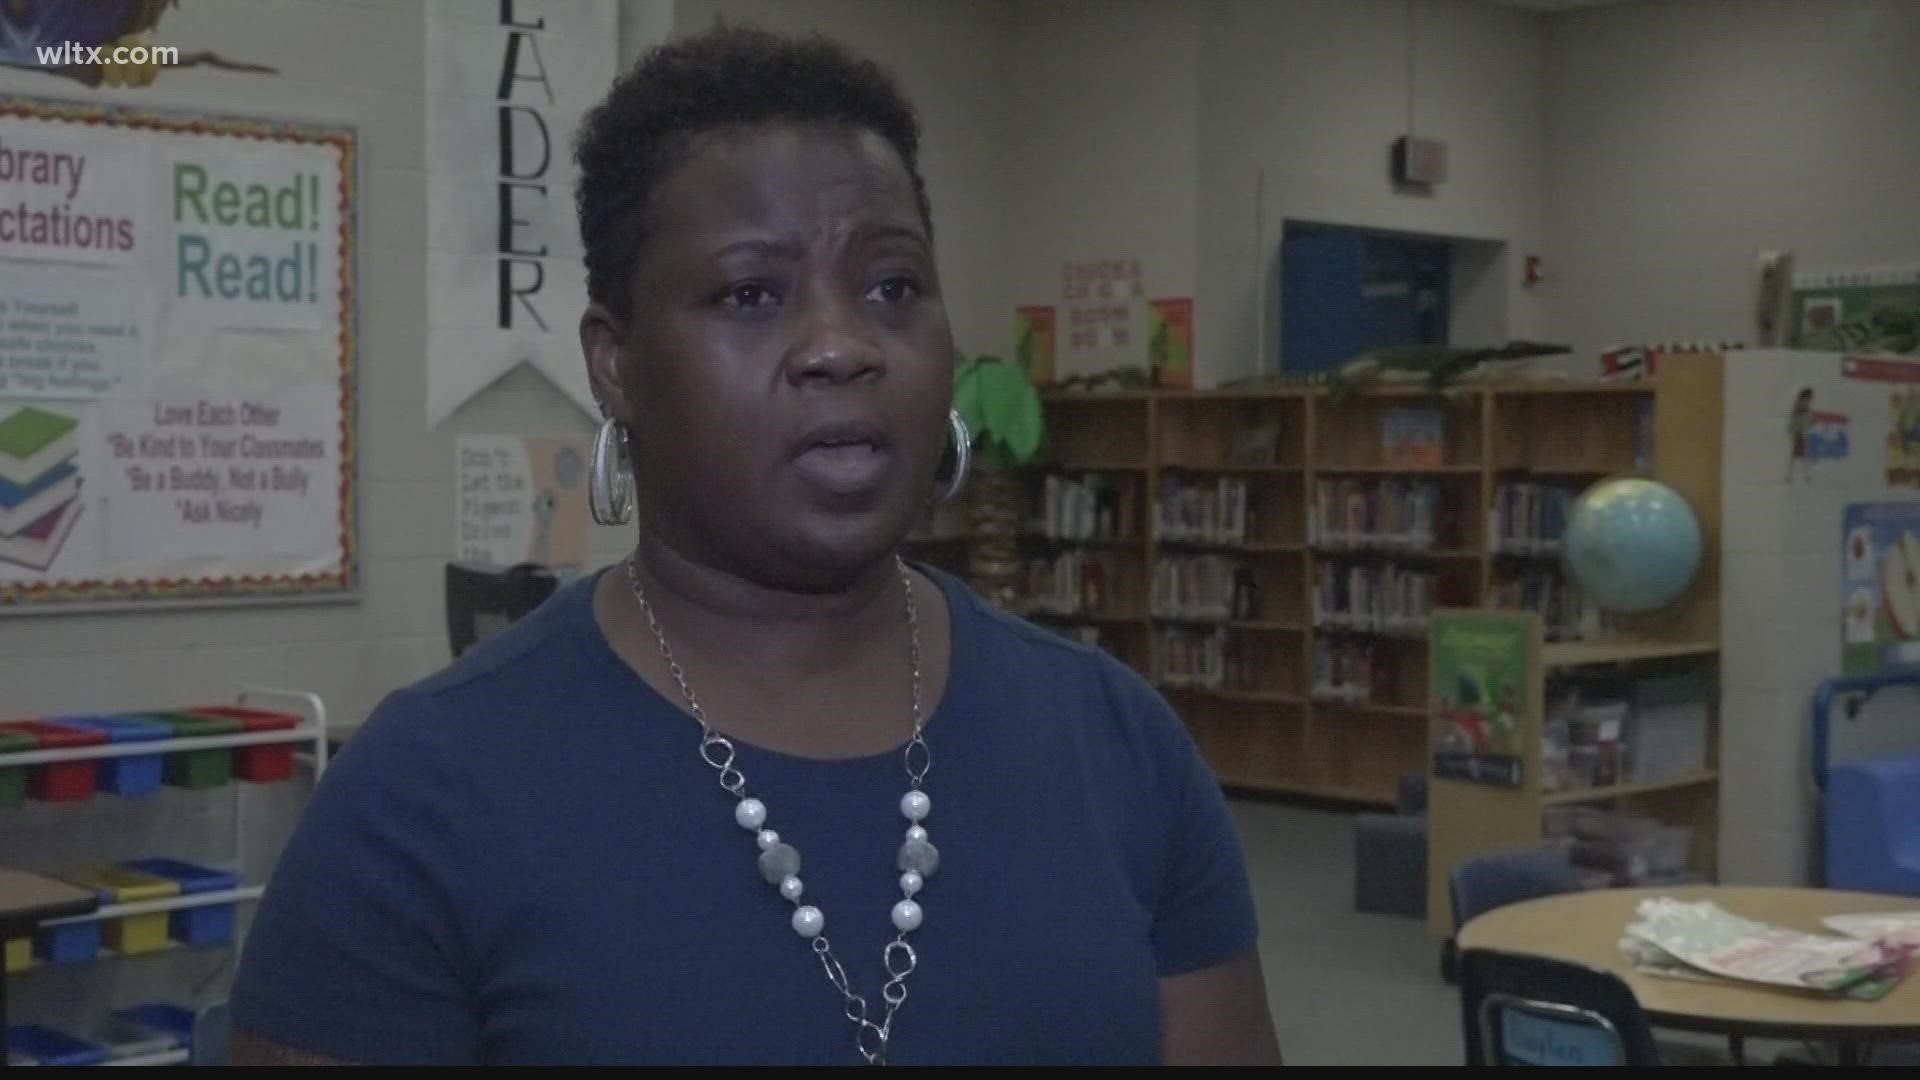 Orangeburg County schools hope to hire from within as staff work to become certified teachers to fill vacant roles.